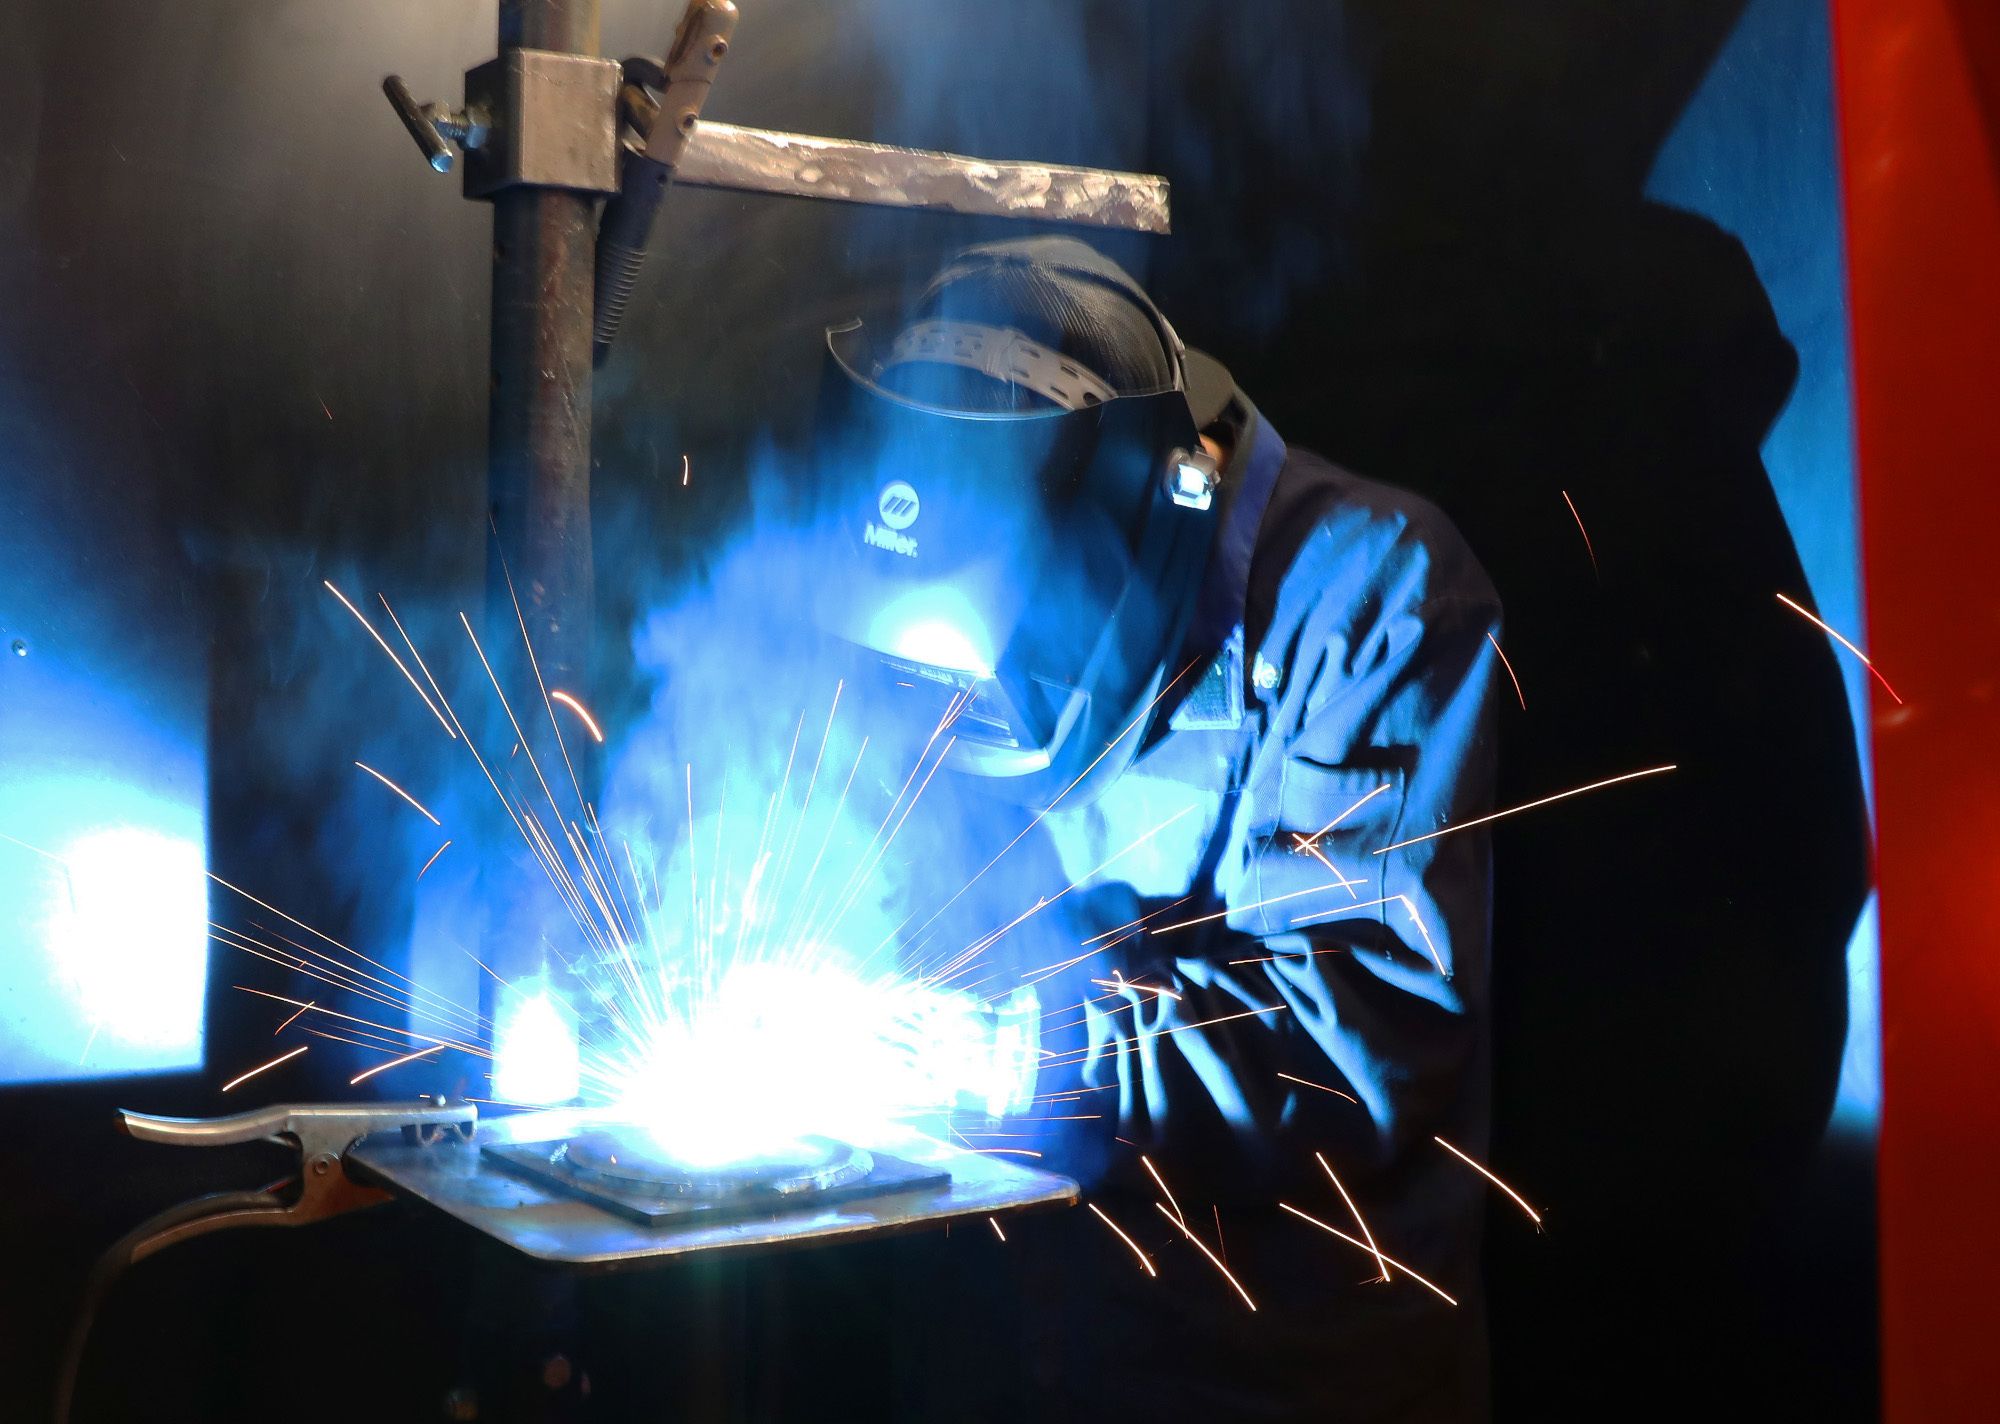 Student welding and sparks are flying